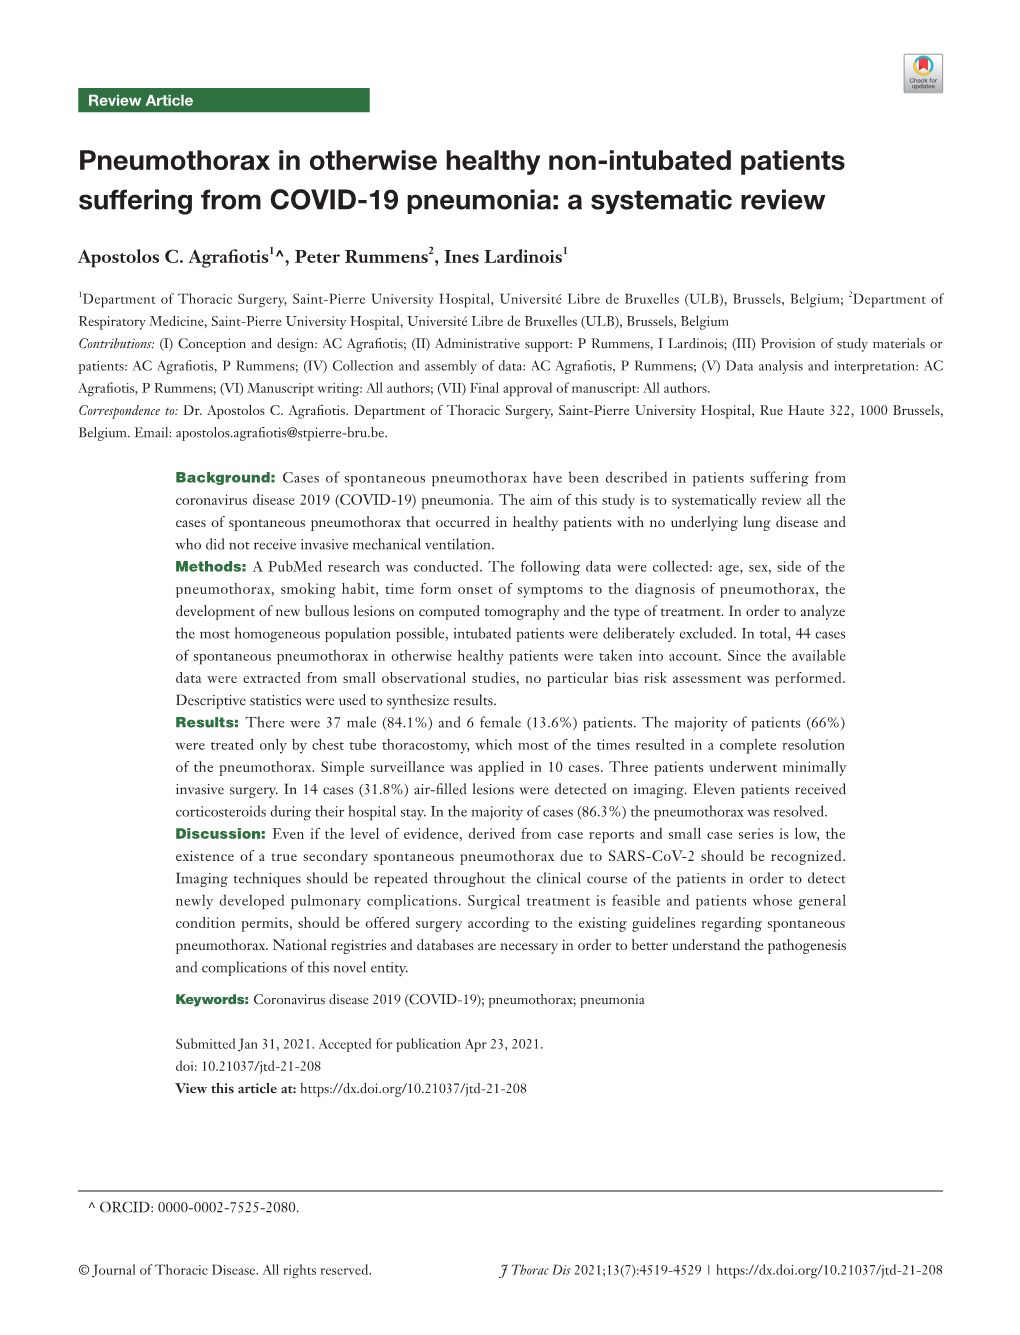 Pneumothorax in Otherwise Healthy Non-Intubated Patients Suffering from COVID-19 Pneumonia: a Systematic Review